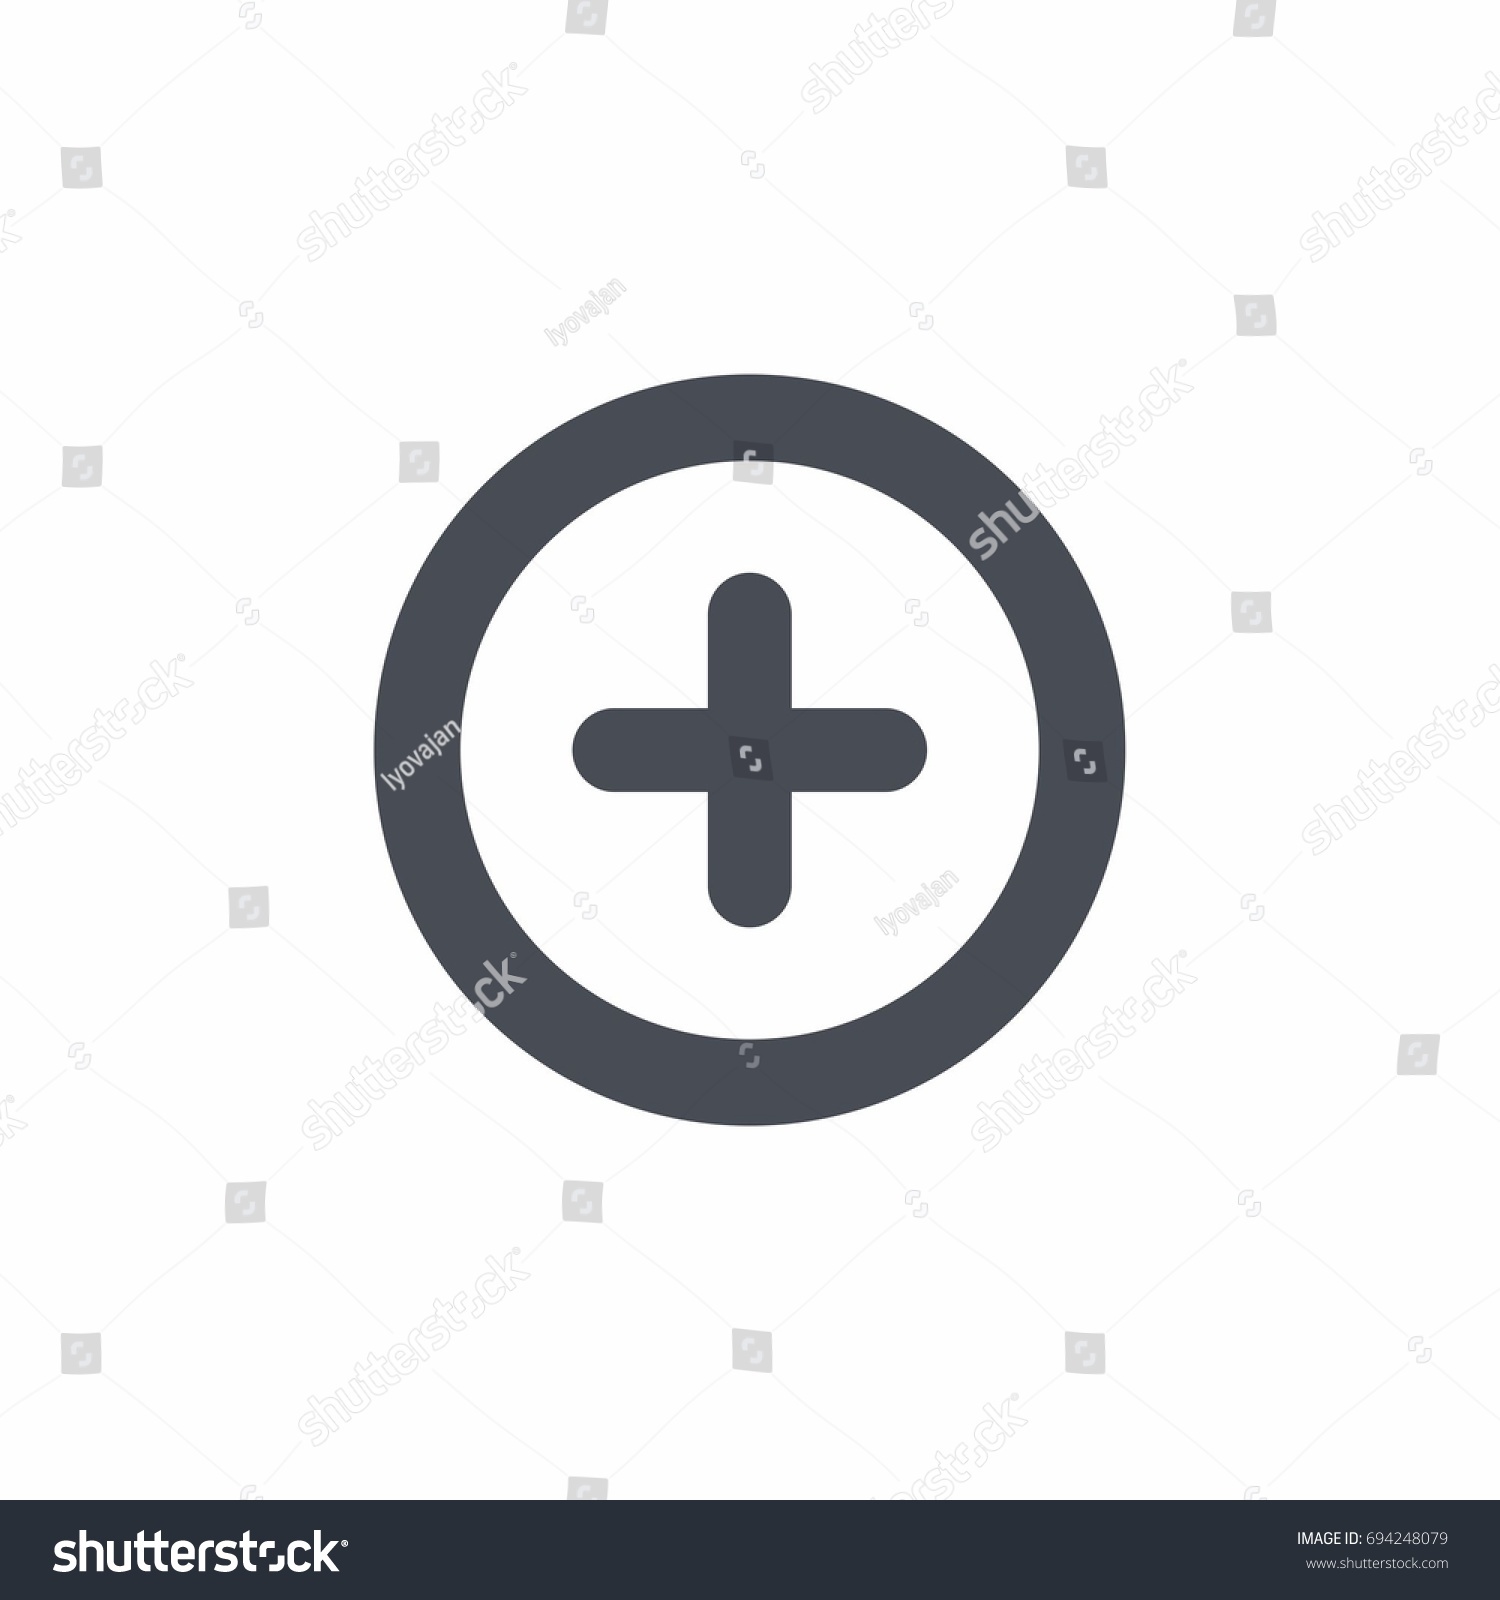 1,688 See more icon Images, Stock Photos & Vectors | Shutterstock